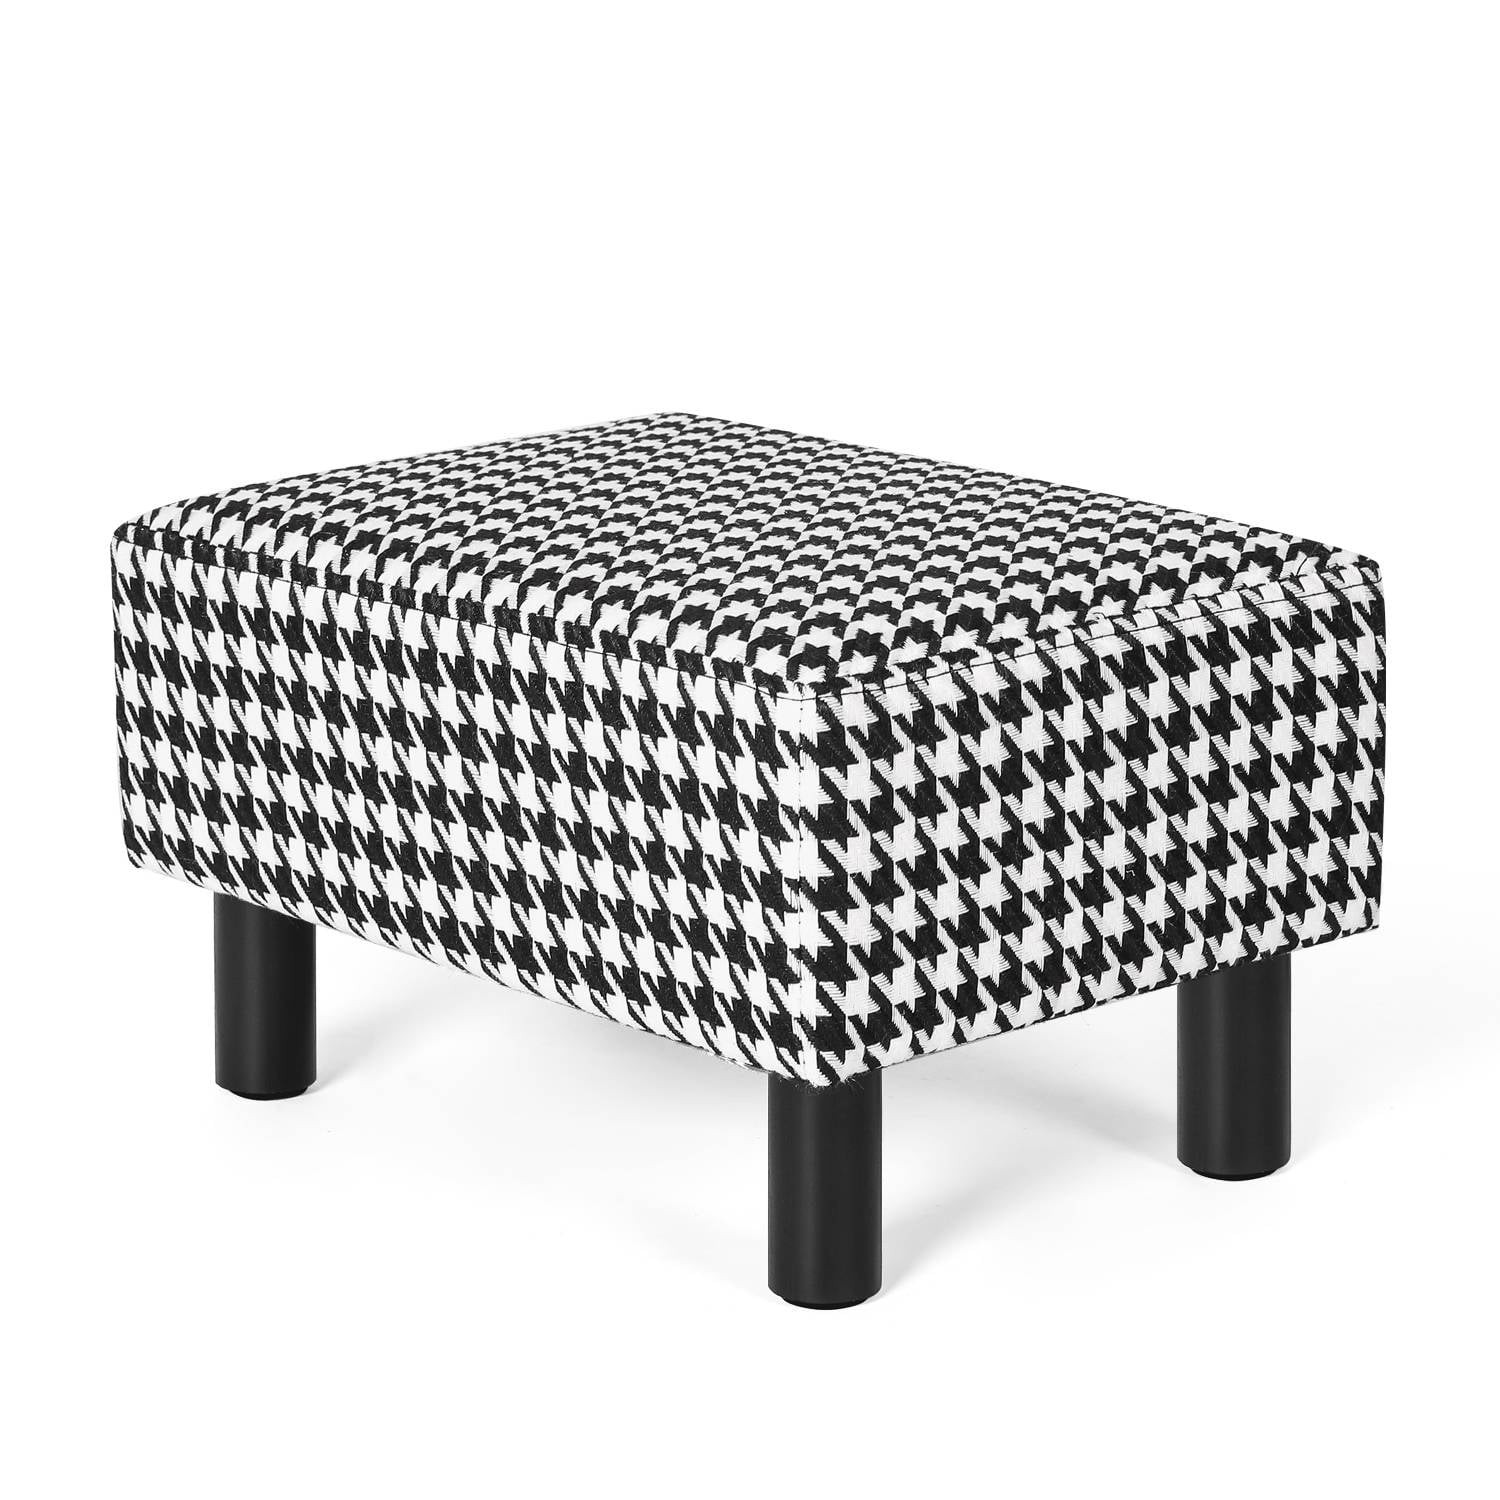 Homebeez Small Rectangle Foot Stool,Ottoman Footrest Stool with Non-Skid  Plastic Legs,Small Step Stool for Couch, Desk, Office, Living Room, Dogs